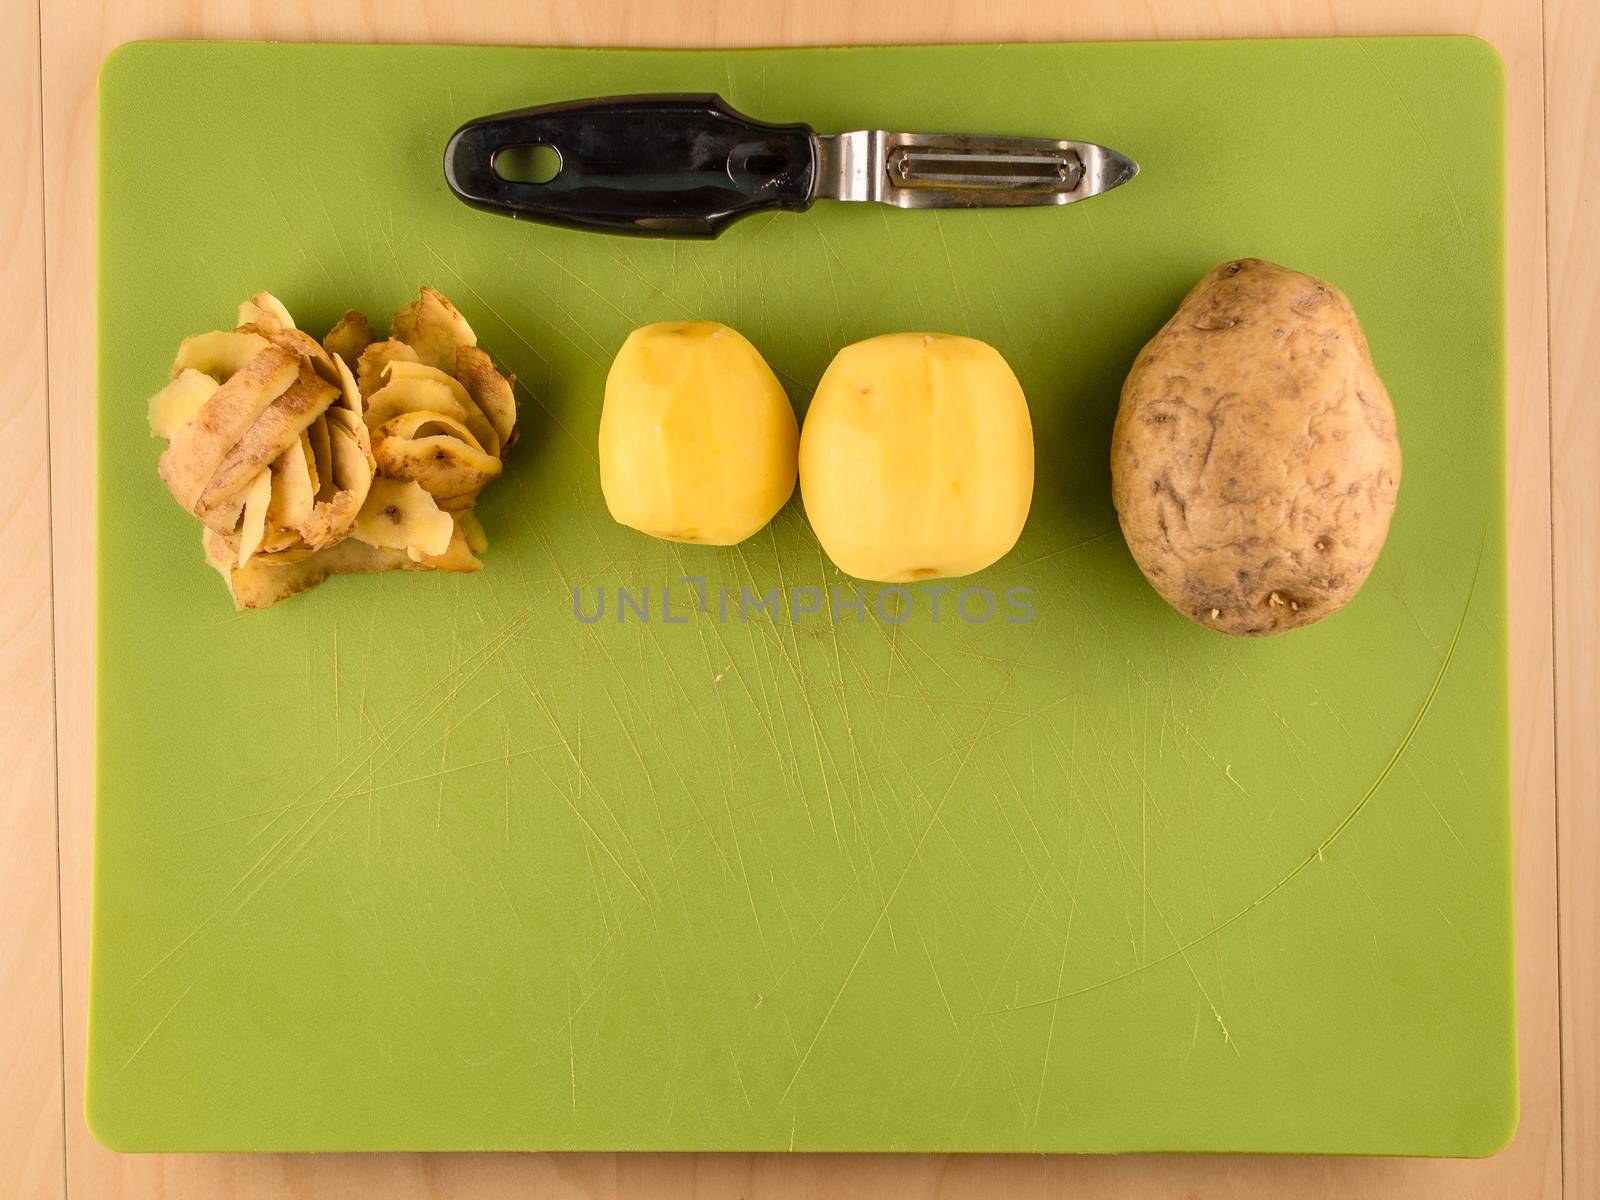 Two unpeeled and one peeled potatoes with skins on green plastic board with peeler, simple food preparation illustration, vegetarian dieting, top view still life with bottom half copyspace